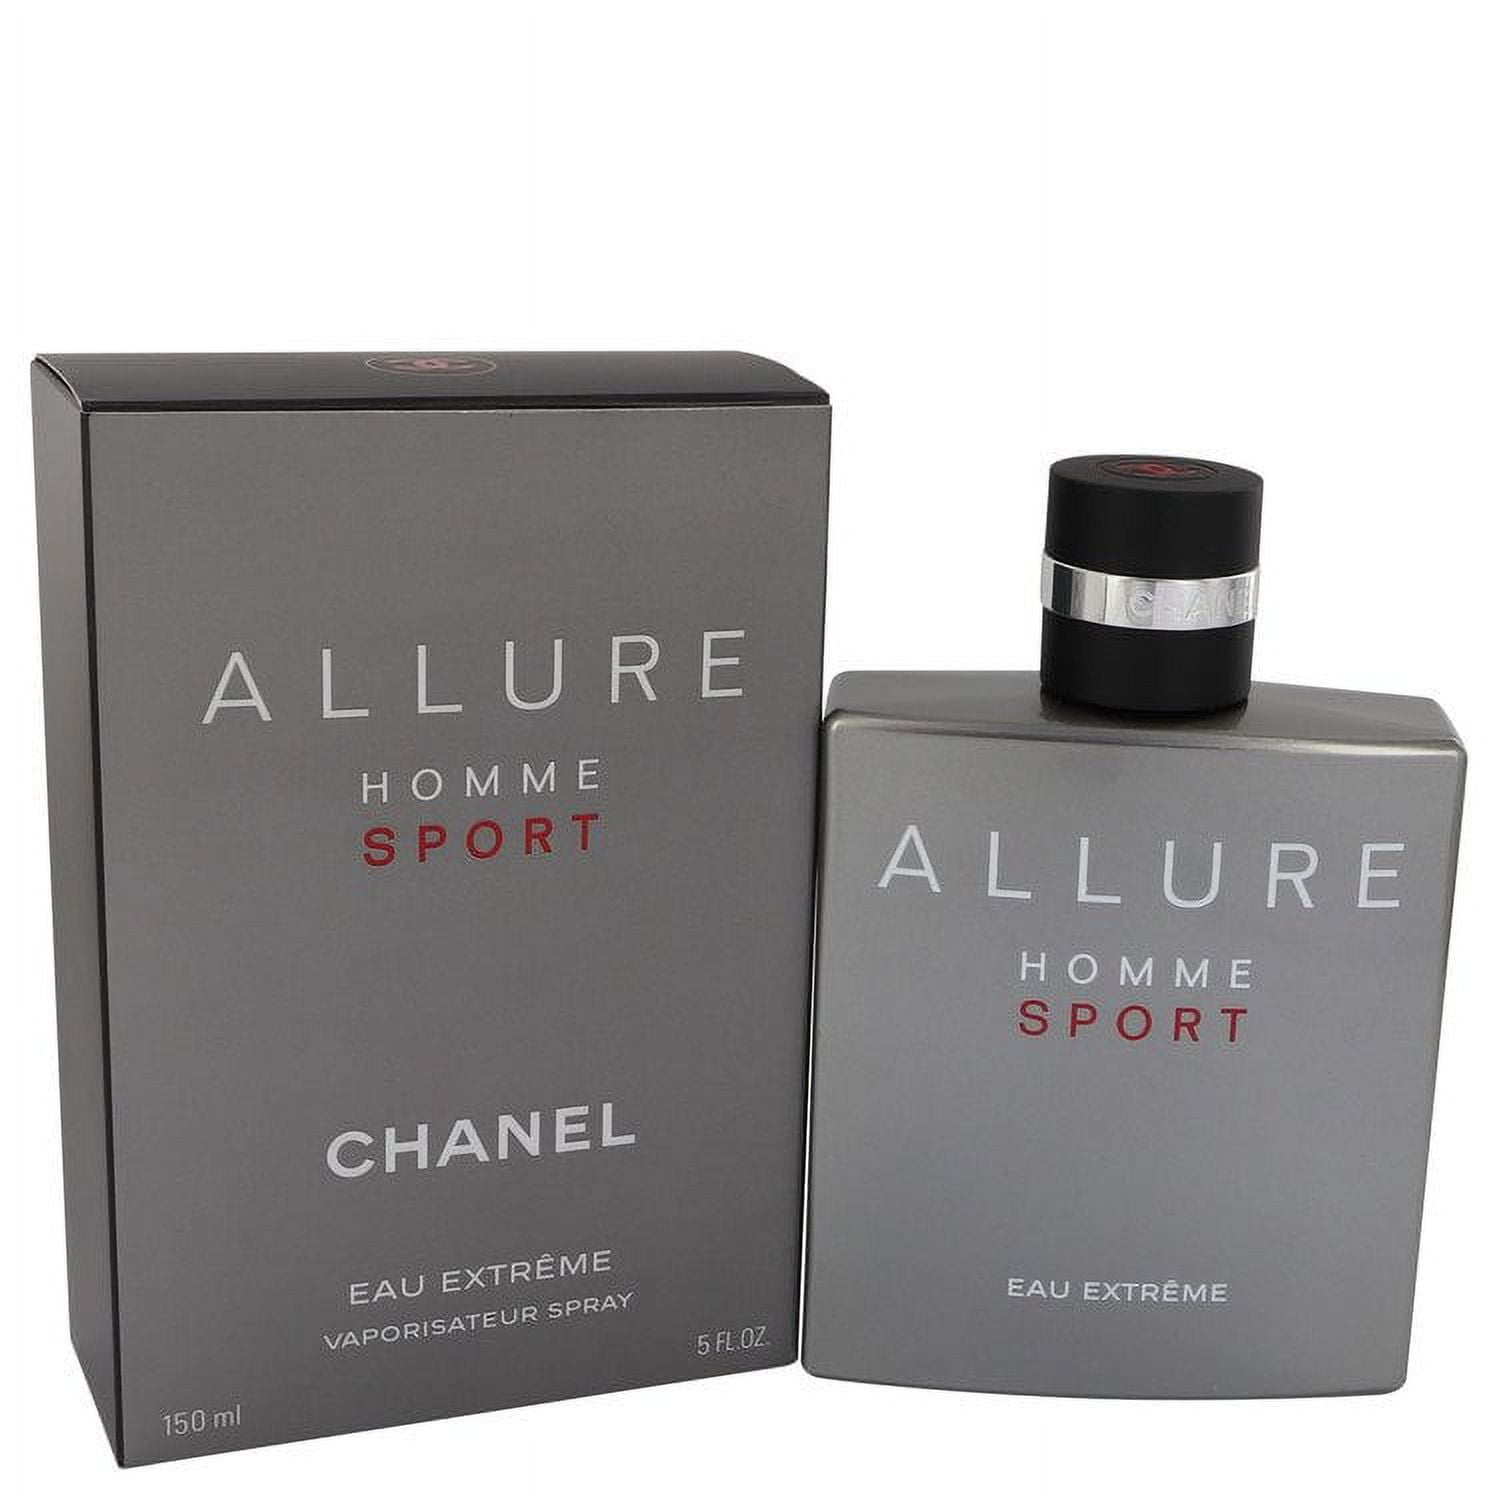 Allure Sport Cologne, Gift Sets by Chanel at